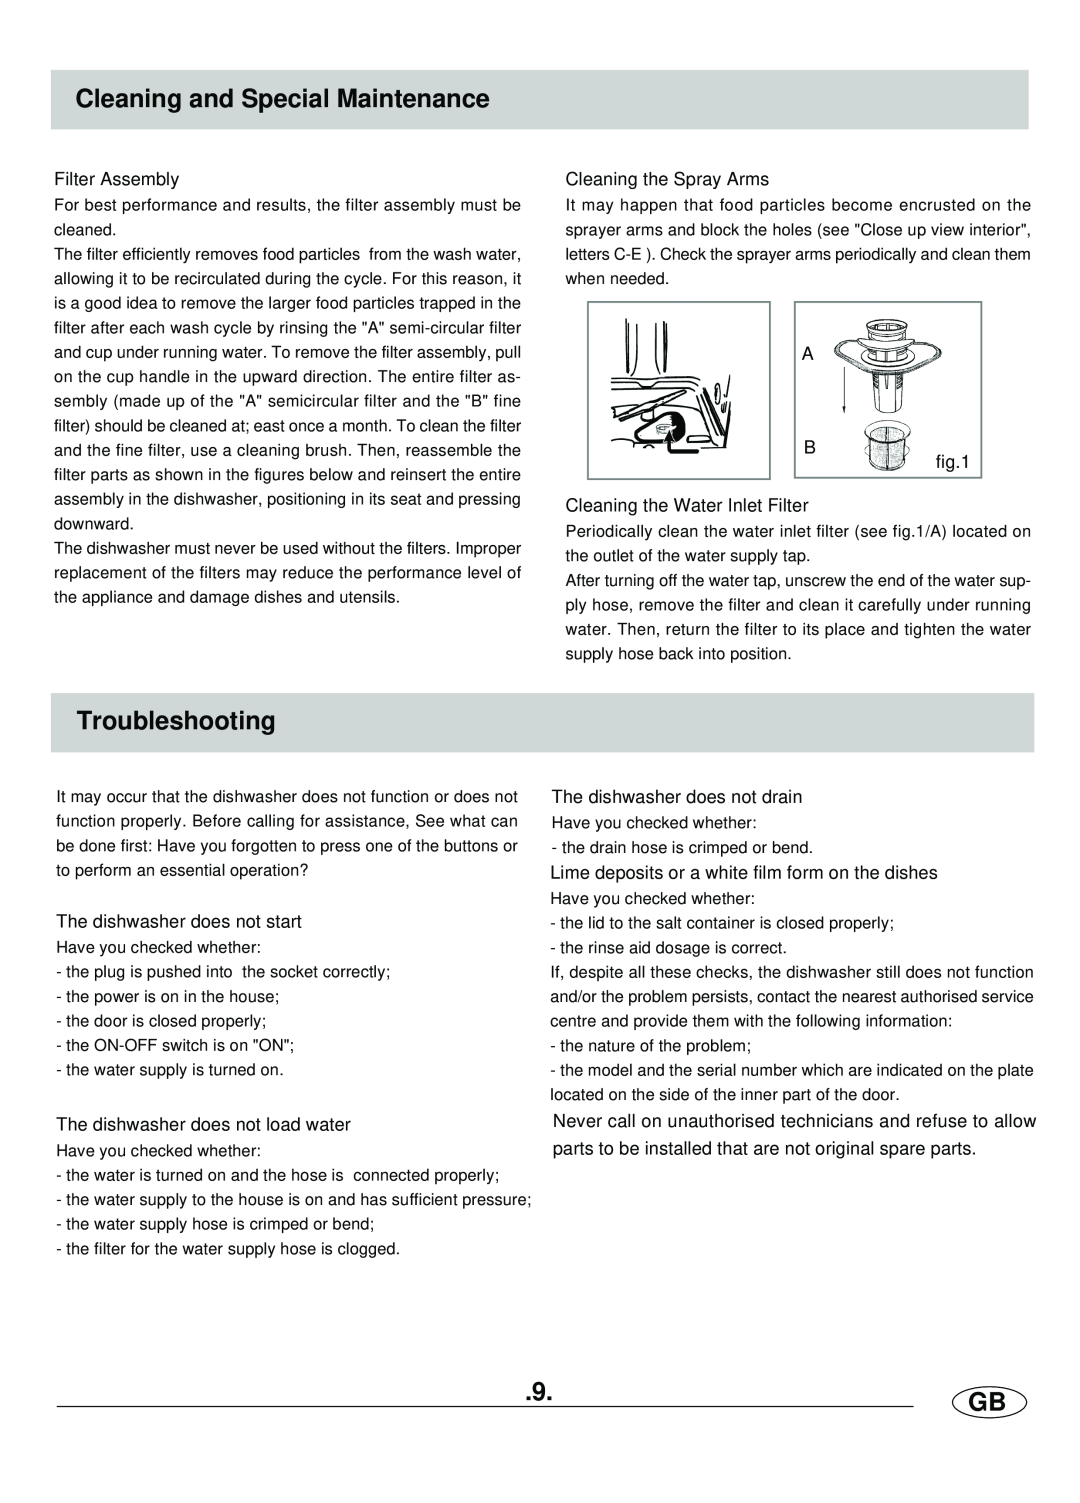 Haier DW9-AFE ME manual Cleaning and Special Maintenance, Troubleshooting, 9.GB, Filter Assembly, Cleaning the Spray Arms 